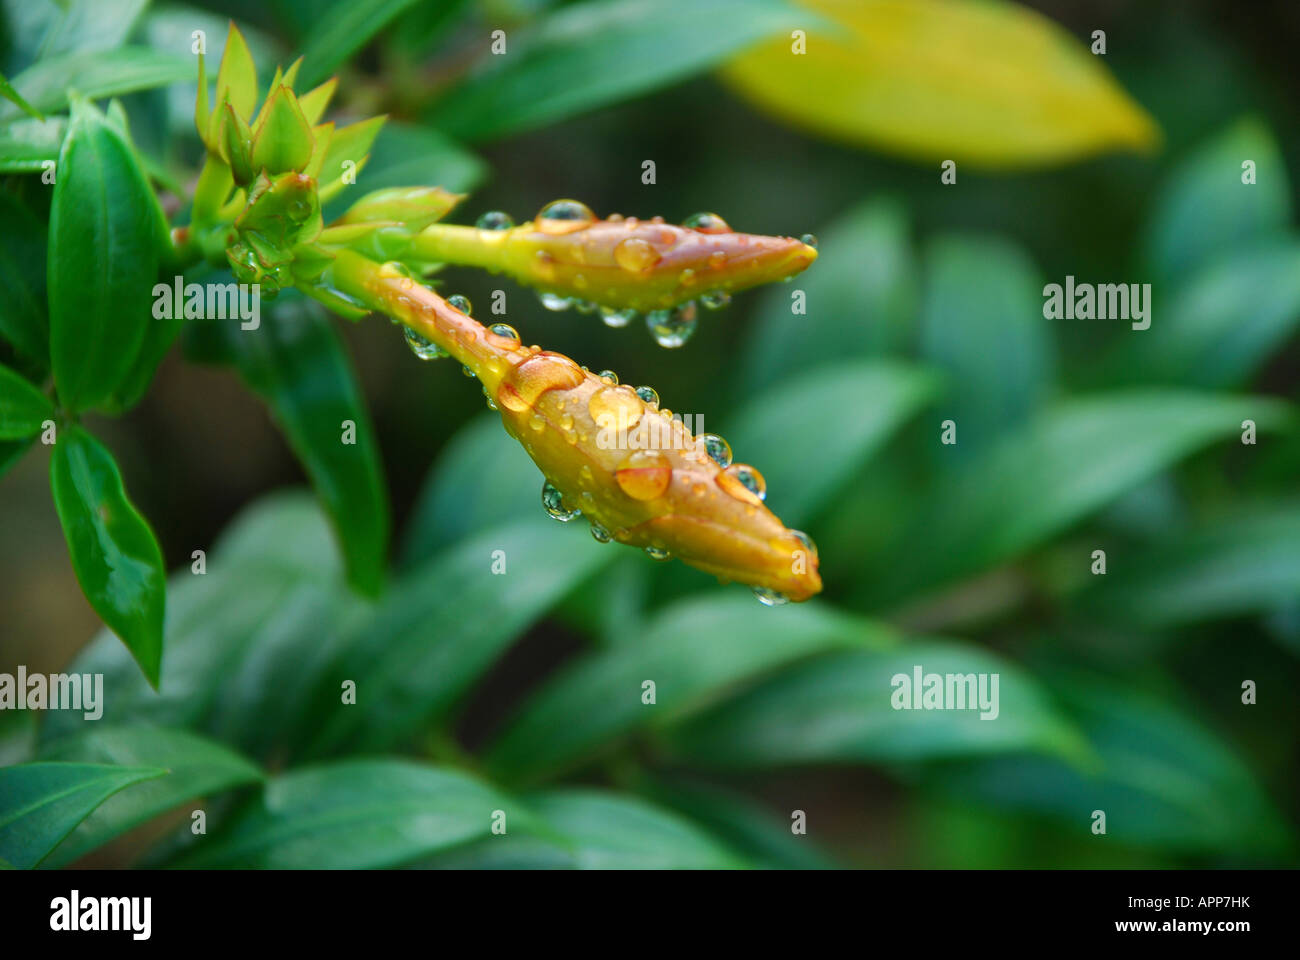 water drops on top of yellow flower bud Stock Photo